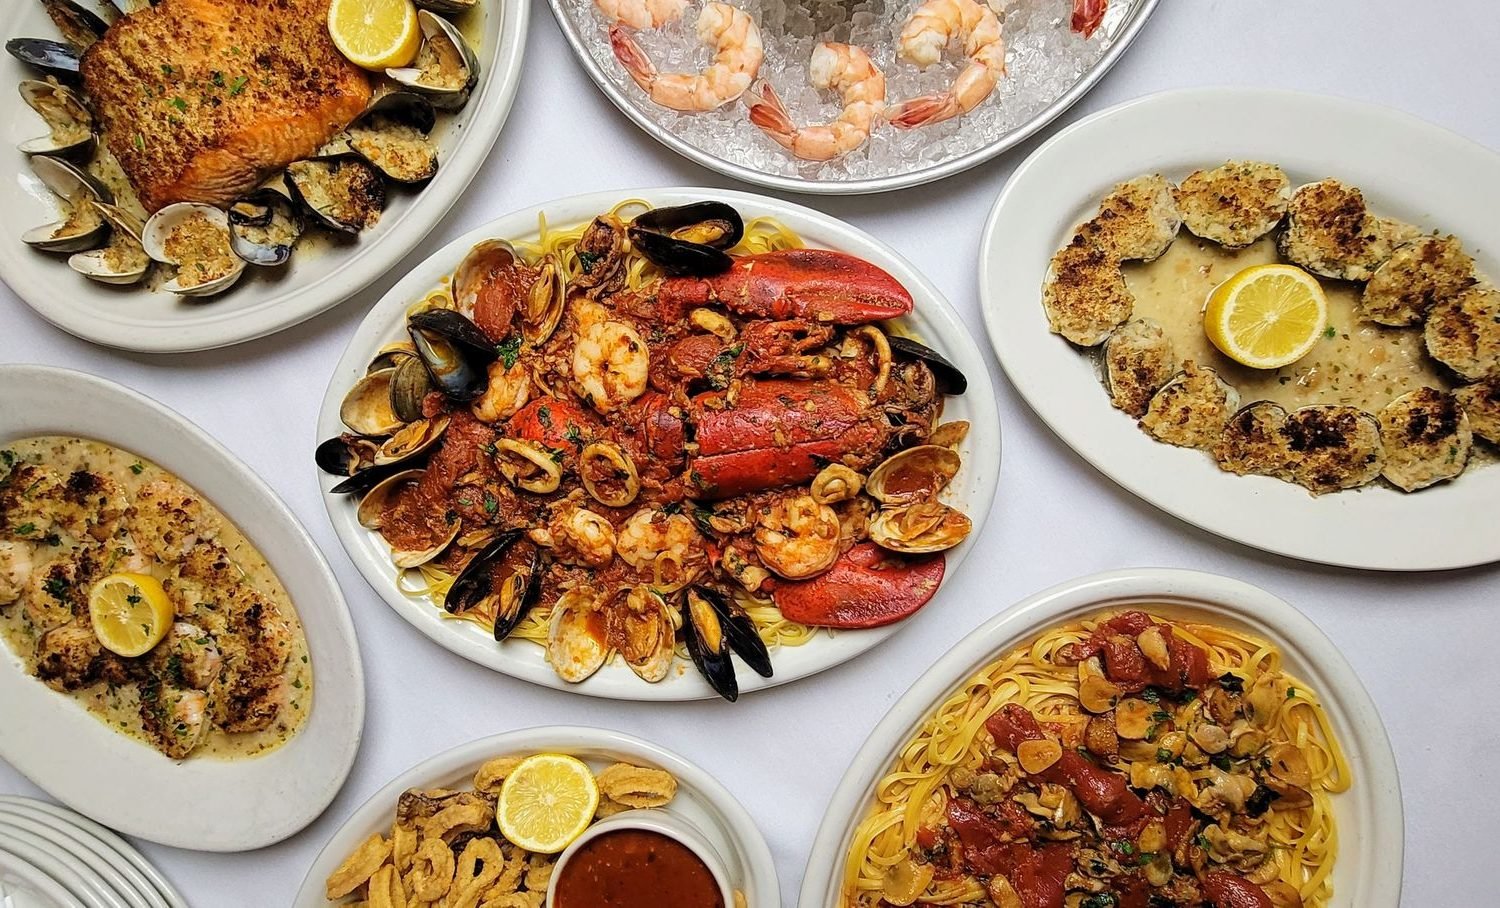 Carmine's is serving the Feast of Seven Fishes on Christmas Eve. Photo courtesy of Carmine's.